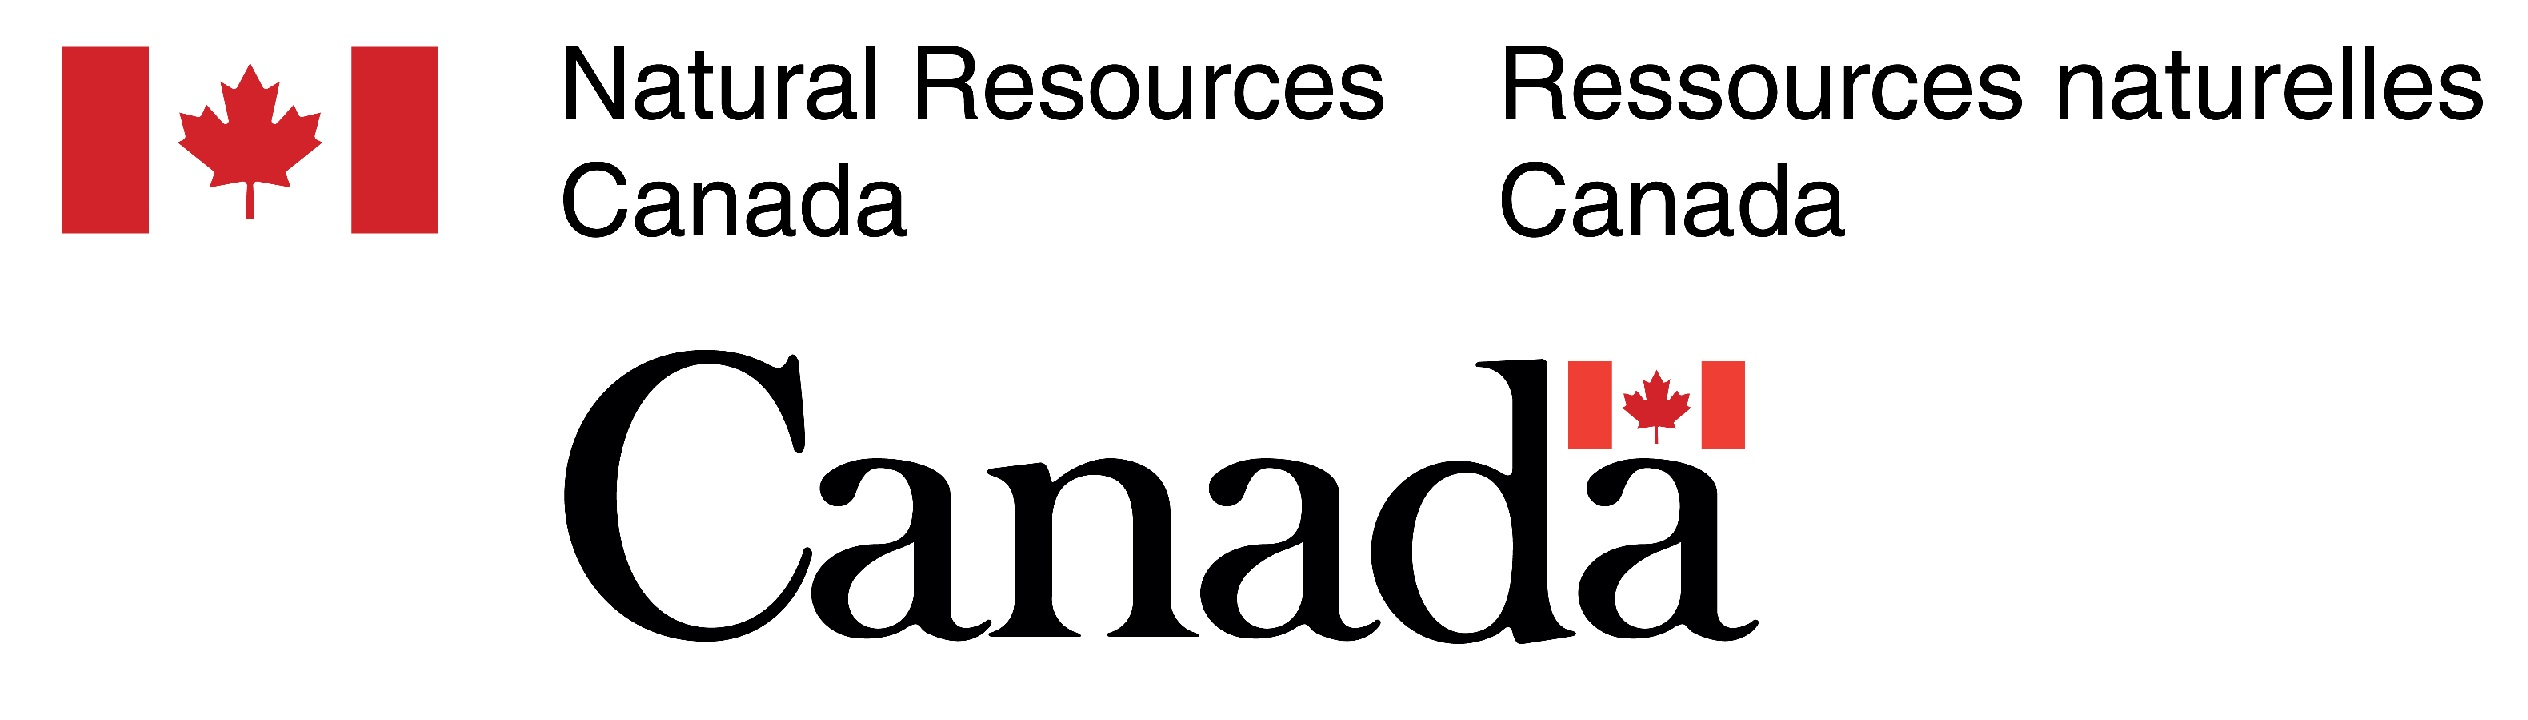 Natural Resources Canada Logo with the Canadian flag, Ressources naturelles Canada